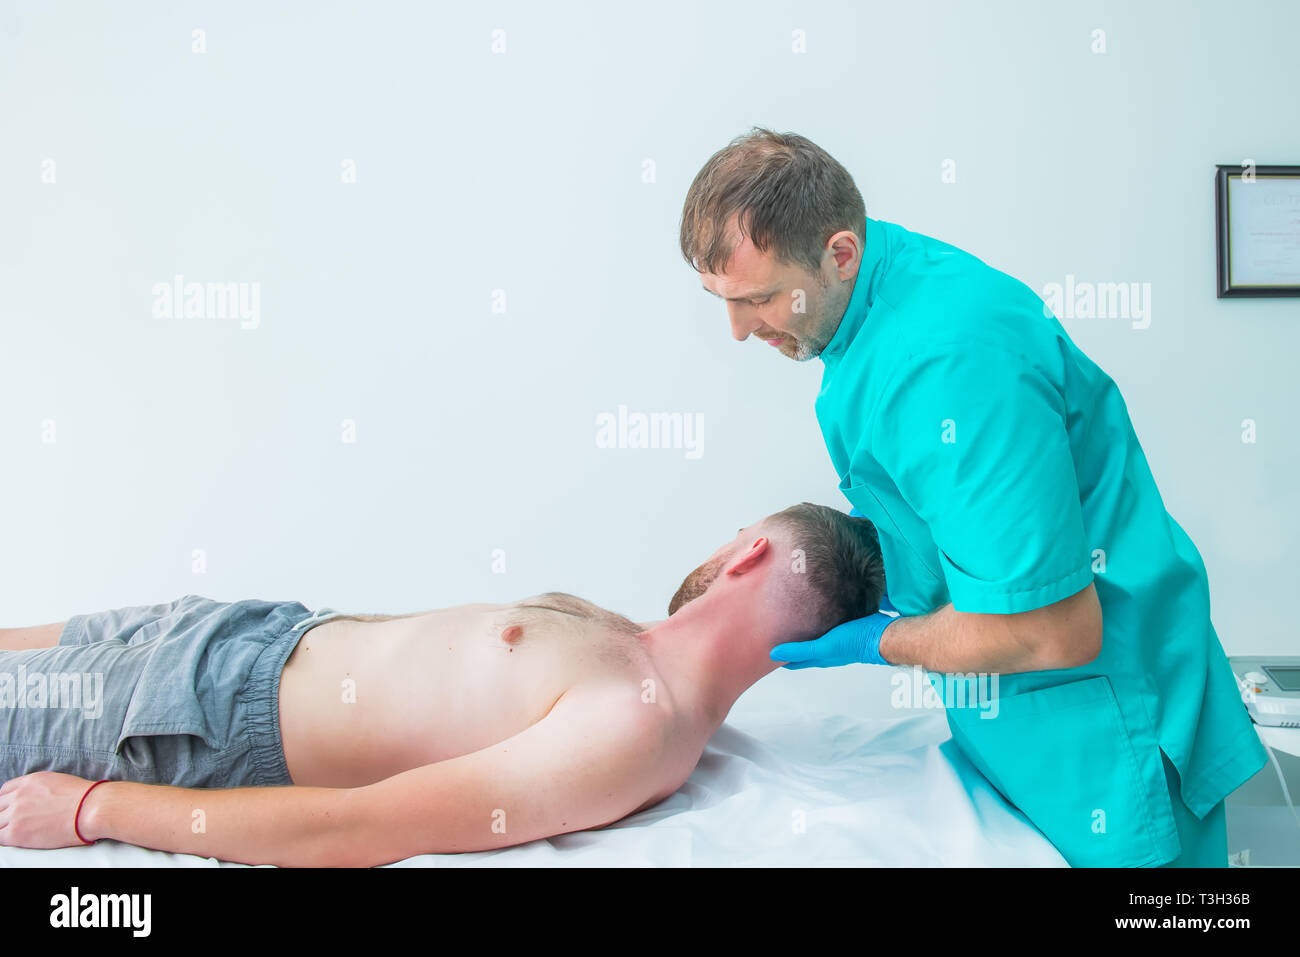 Male patient receiving massage from therapist. A chiropractor stretching his patient's neck in medical office. Neurological physical examination. Oste Stock Photo